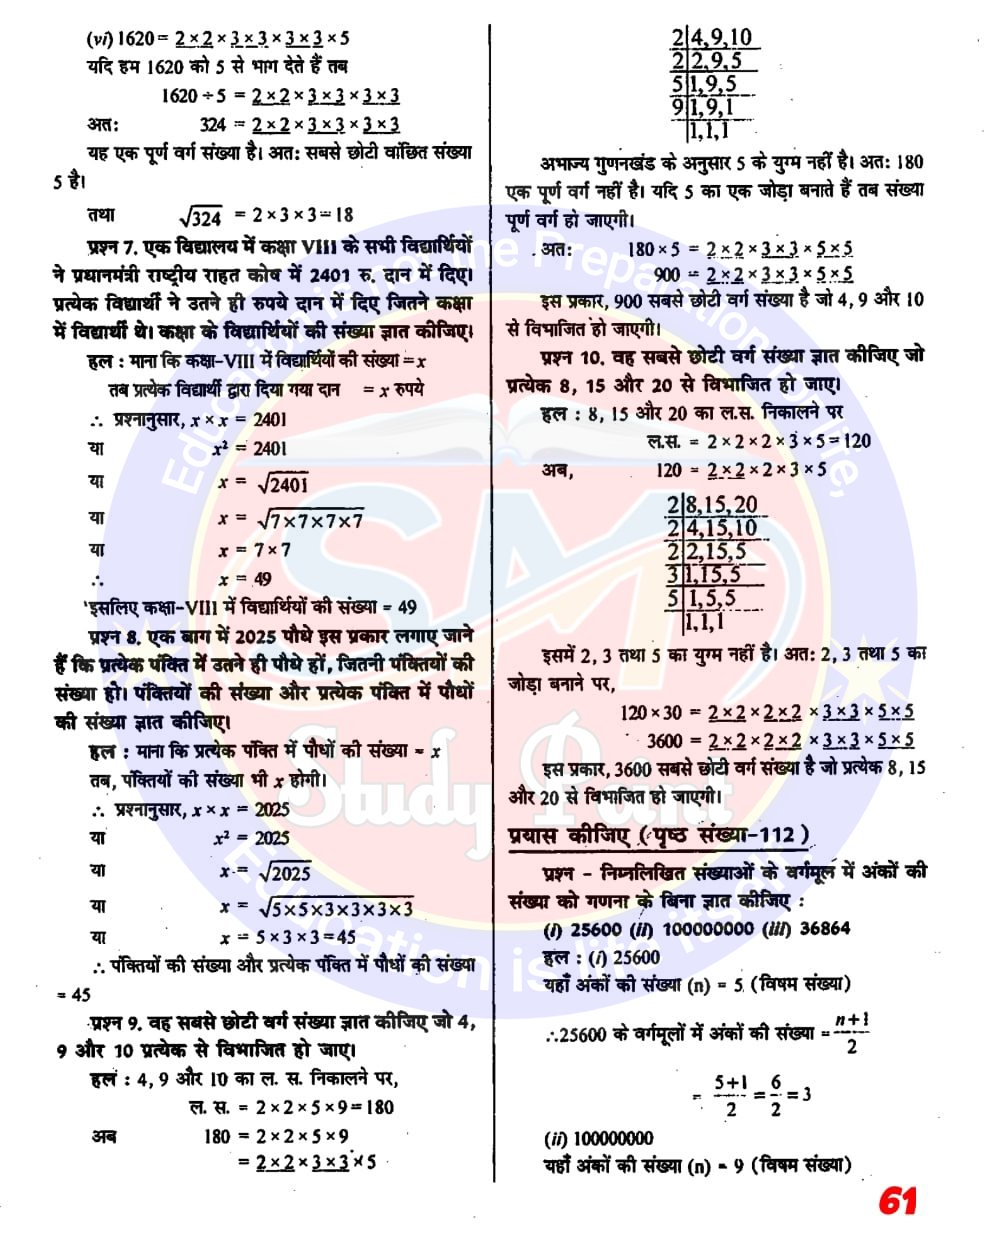 Class 8th NCERT Math Chapter 6 | Class 8 Sarkari Math Adhyay 6 | Square and Root | Exercise 6.1, 6.2, 6.3, 6.4  | क्लास 8 सरकारी गणित अध्याय 6 वर्ग और वर्गमूल | प्रश्नावली 6.1, 6.2, 6.3, 6.4 | SM Study Point